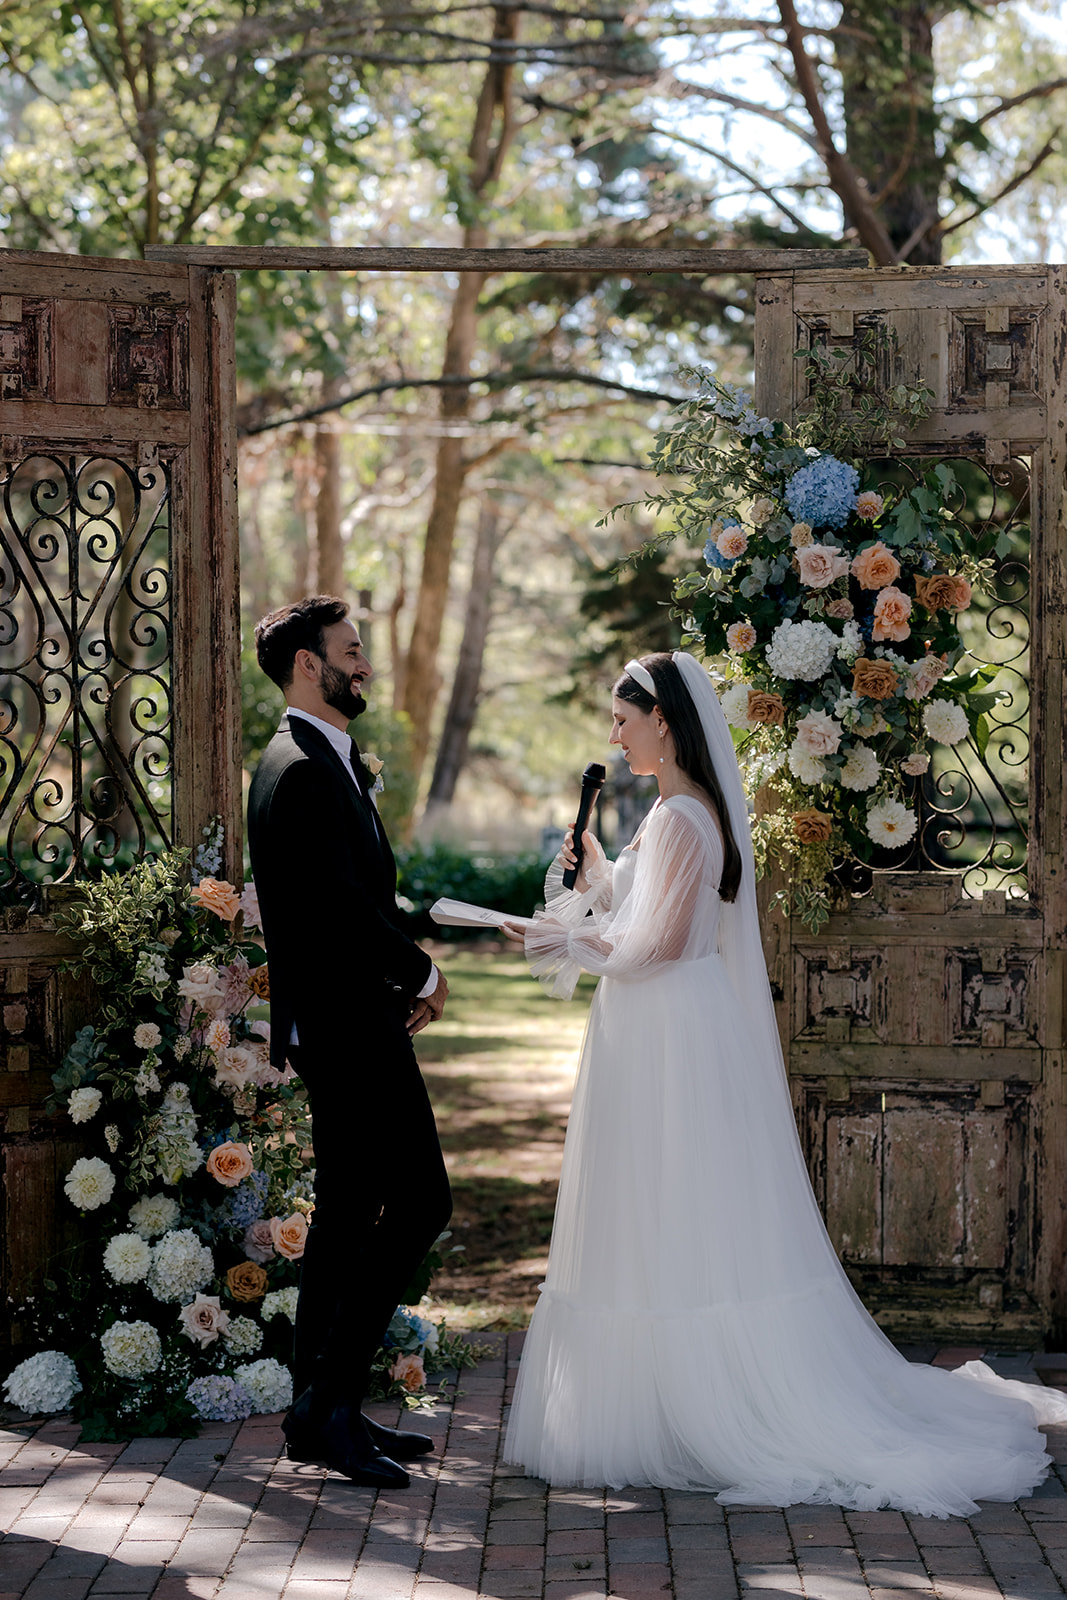 Portrait of bride & groom exchanging vows at their elegant country wedding ceremony.